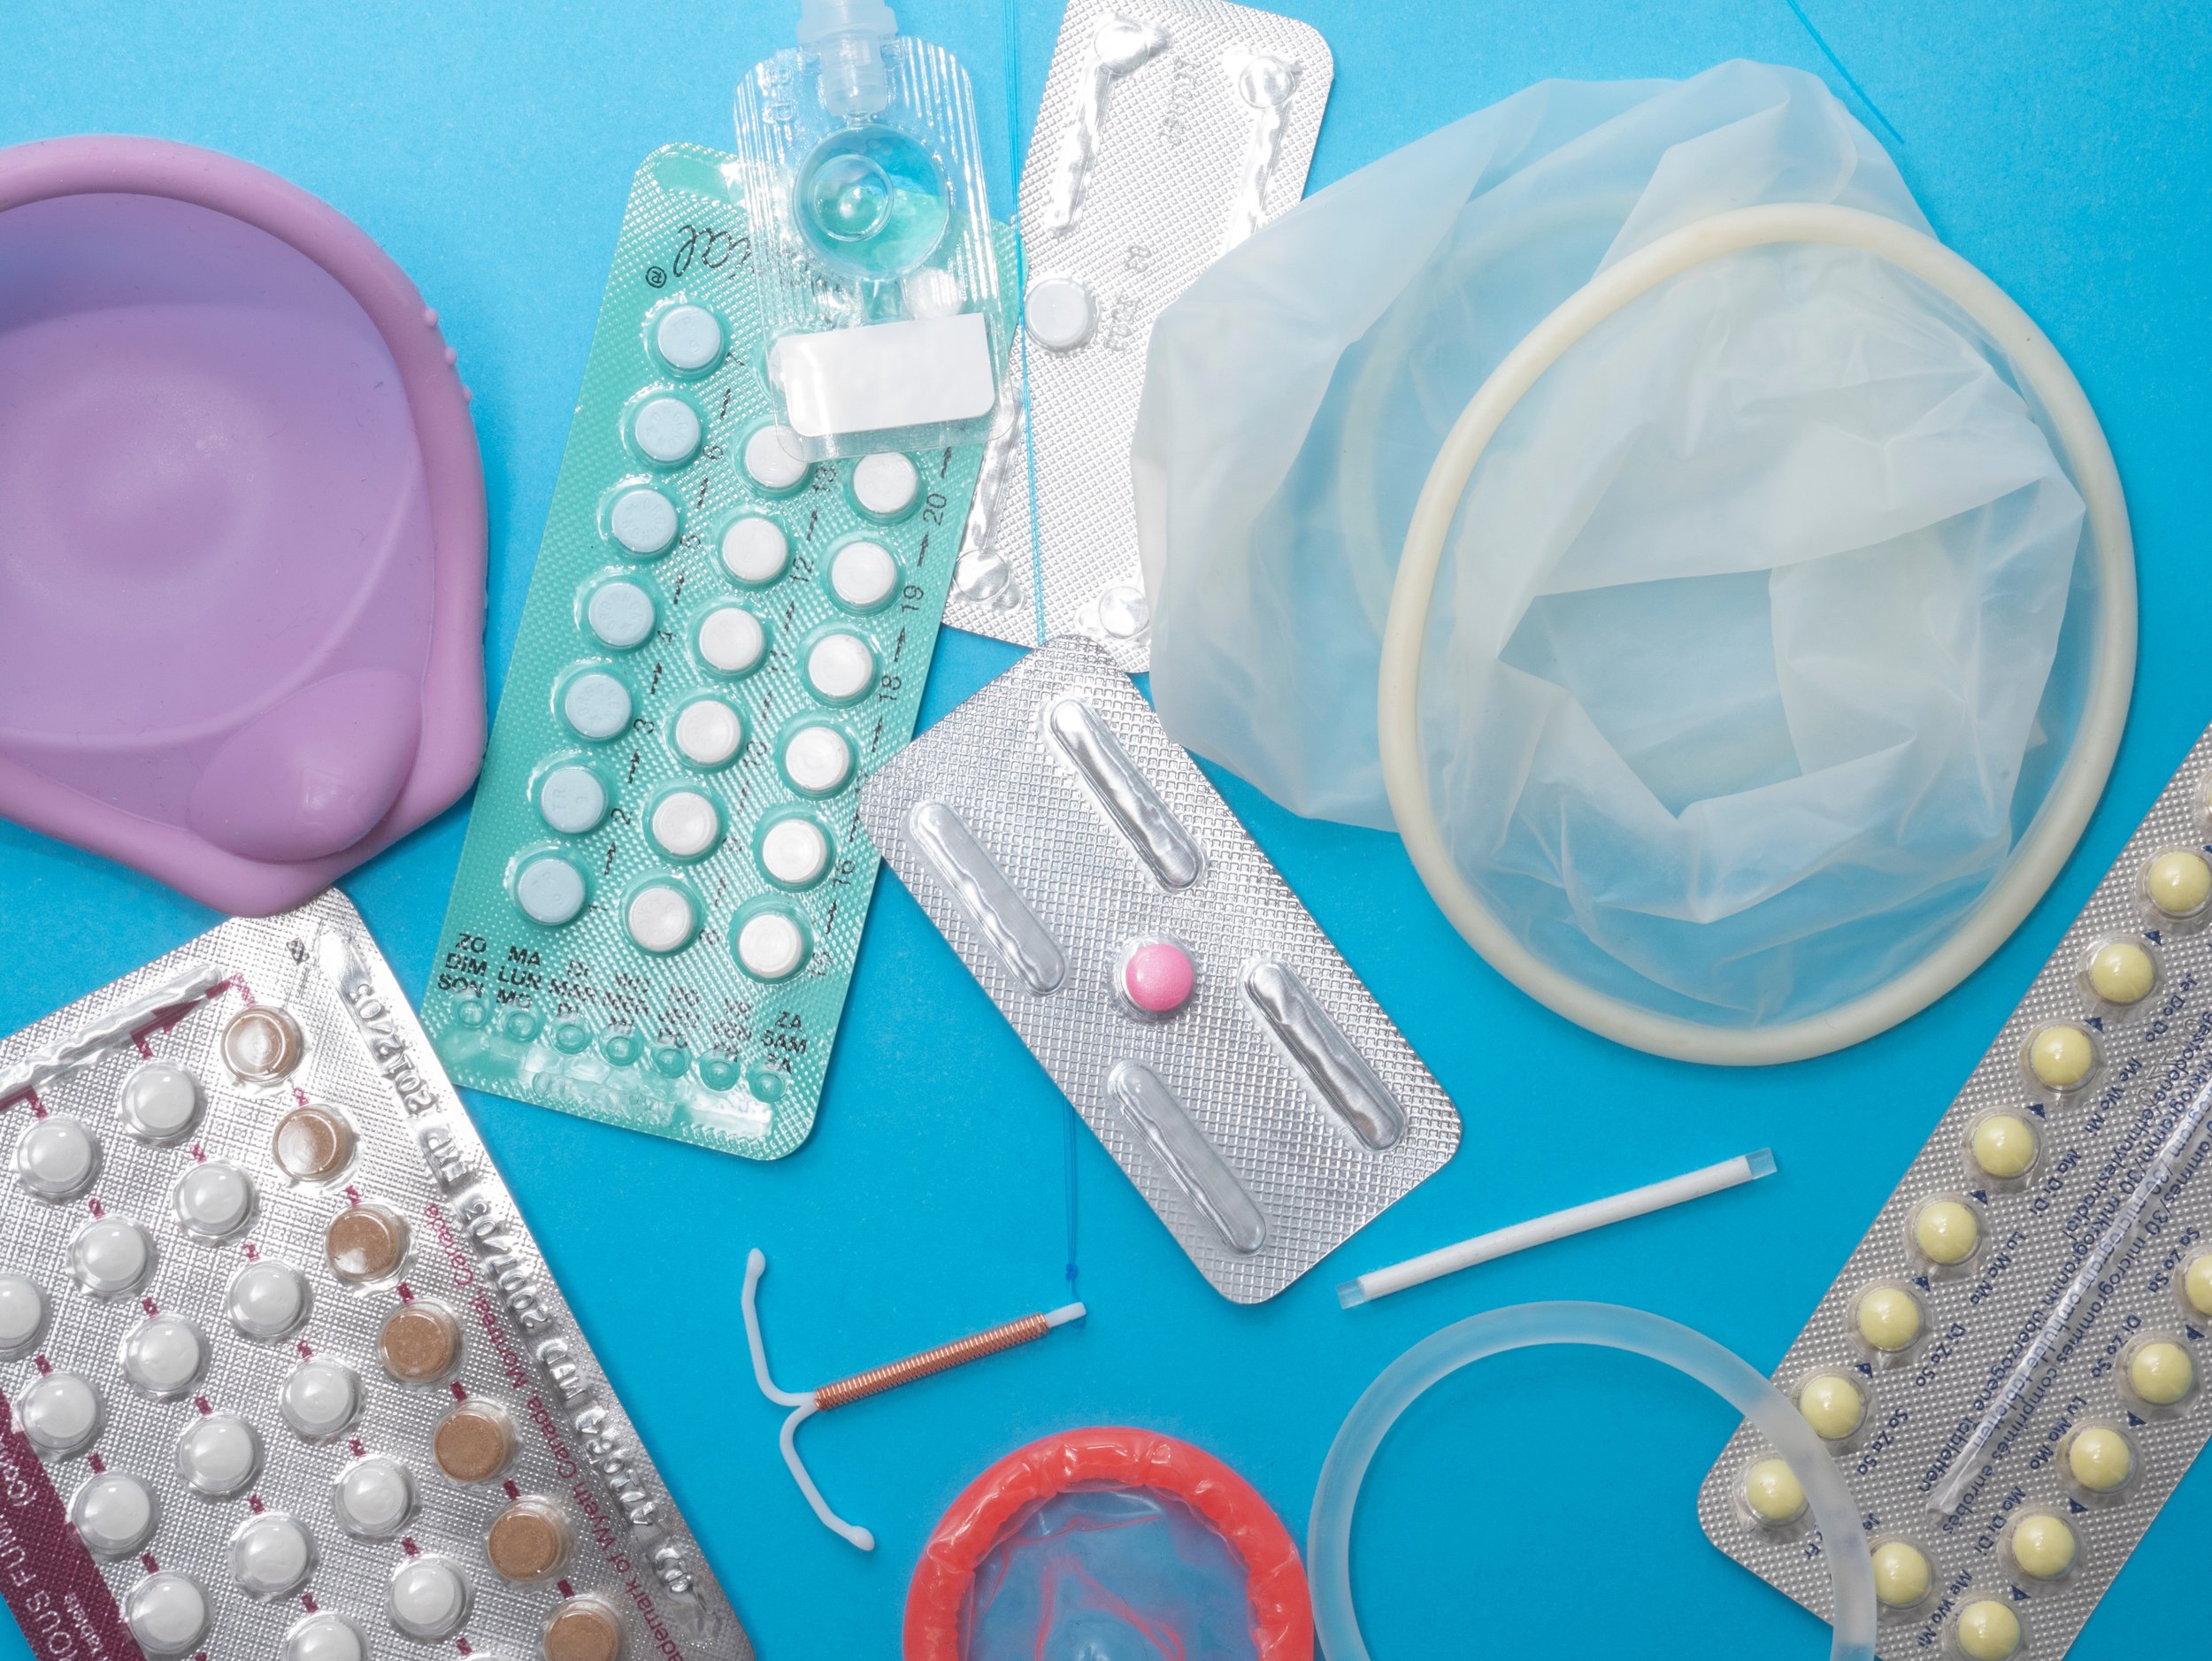   do you need an abortion or contraceptive care?    